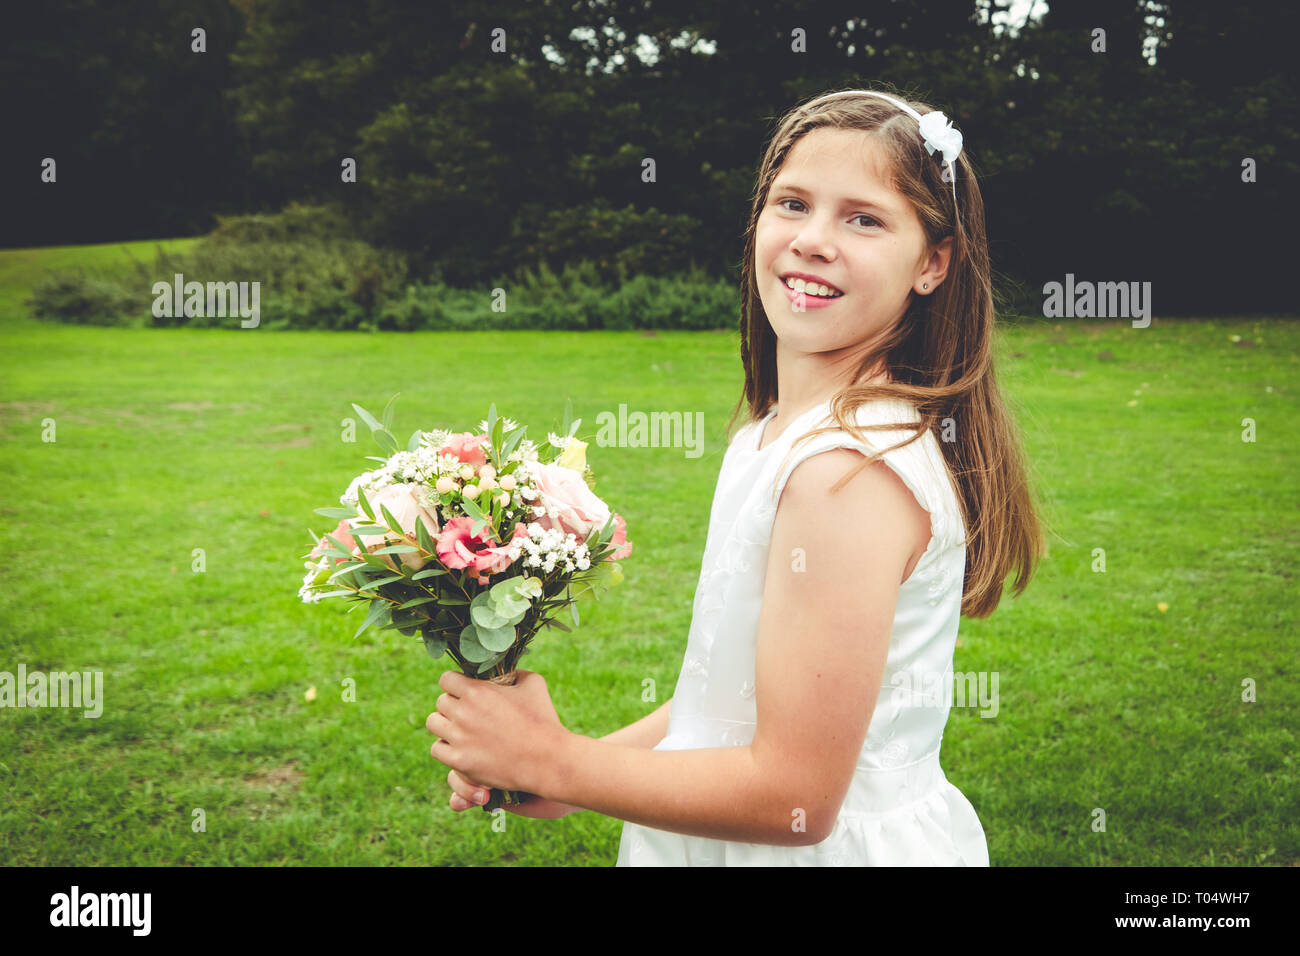 Sweet young girl tween or teen bridesmaid in a white dress with rustic posy bouquet in a park Stock Photo